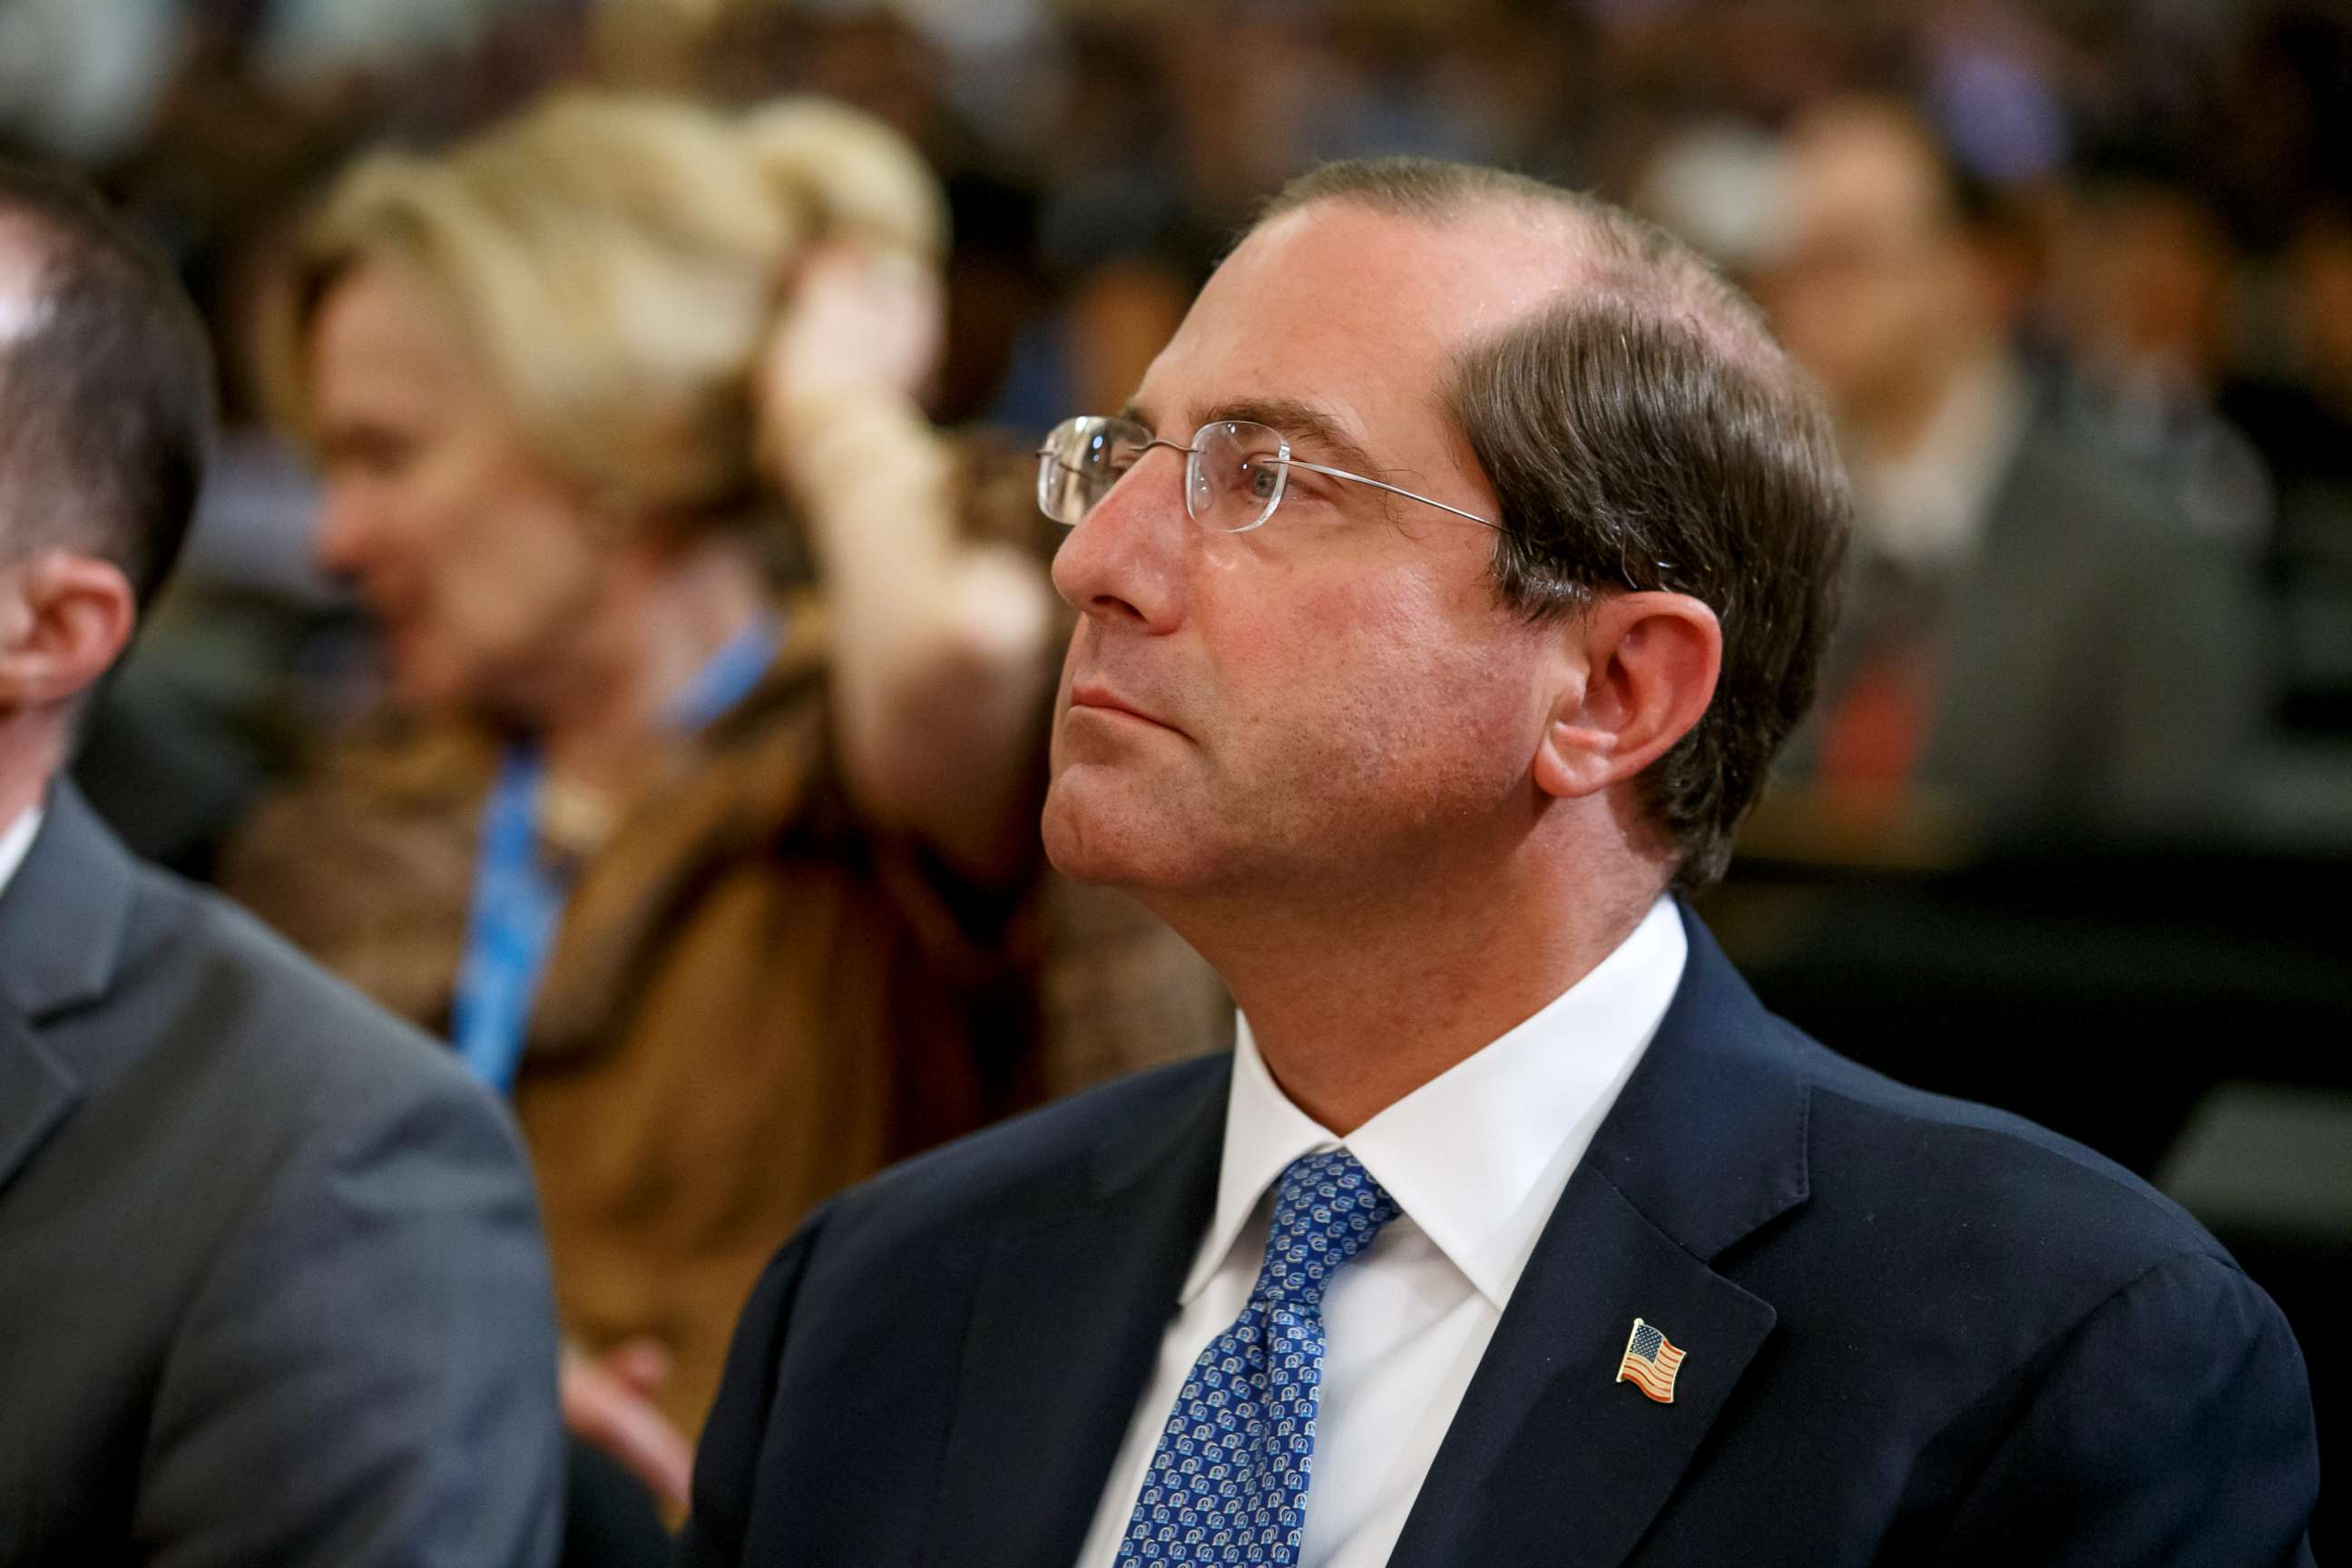 PHOTO: Secretary of Health and Human Services Alex Azar attends the 72nd World Health Assembly at the European headquarters of the United Nations in Geneva, Switzerland, May 20, 2019.